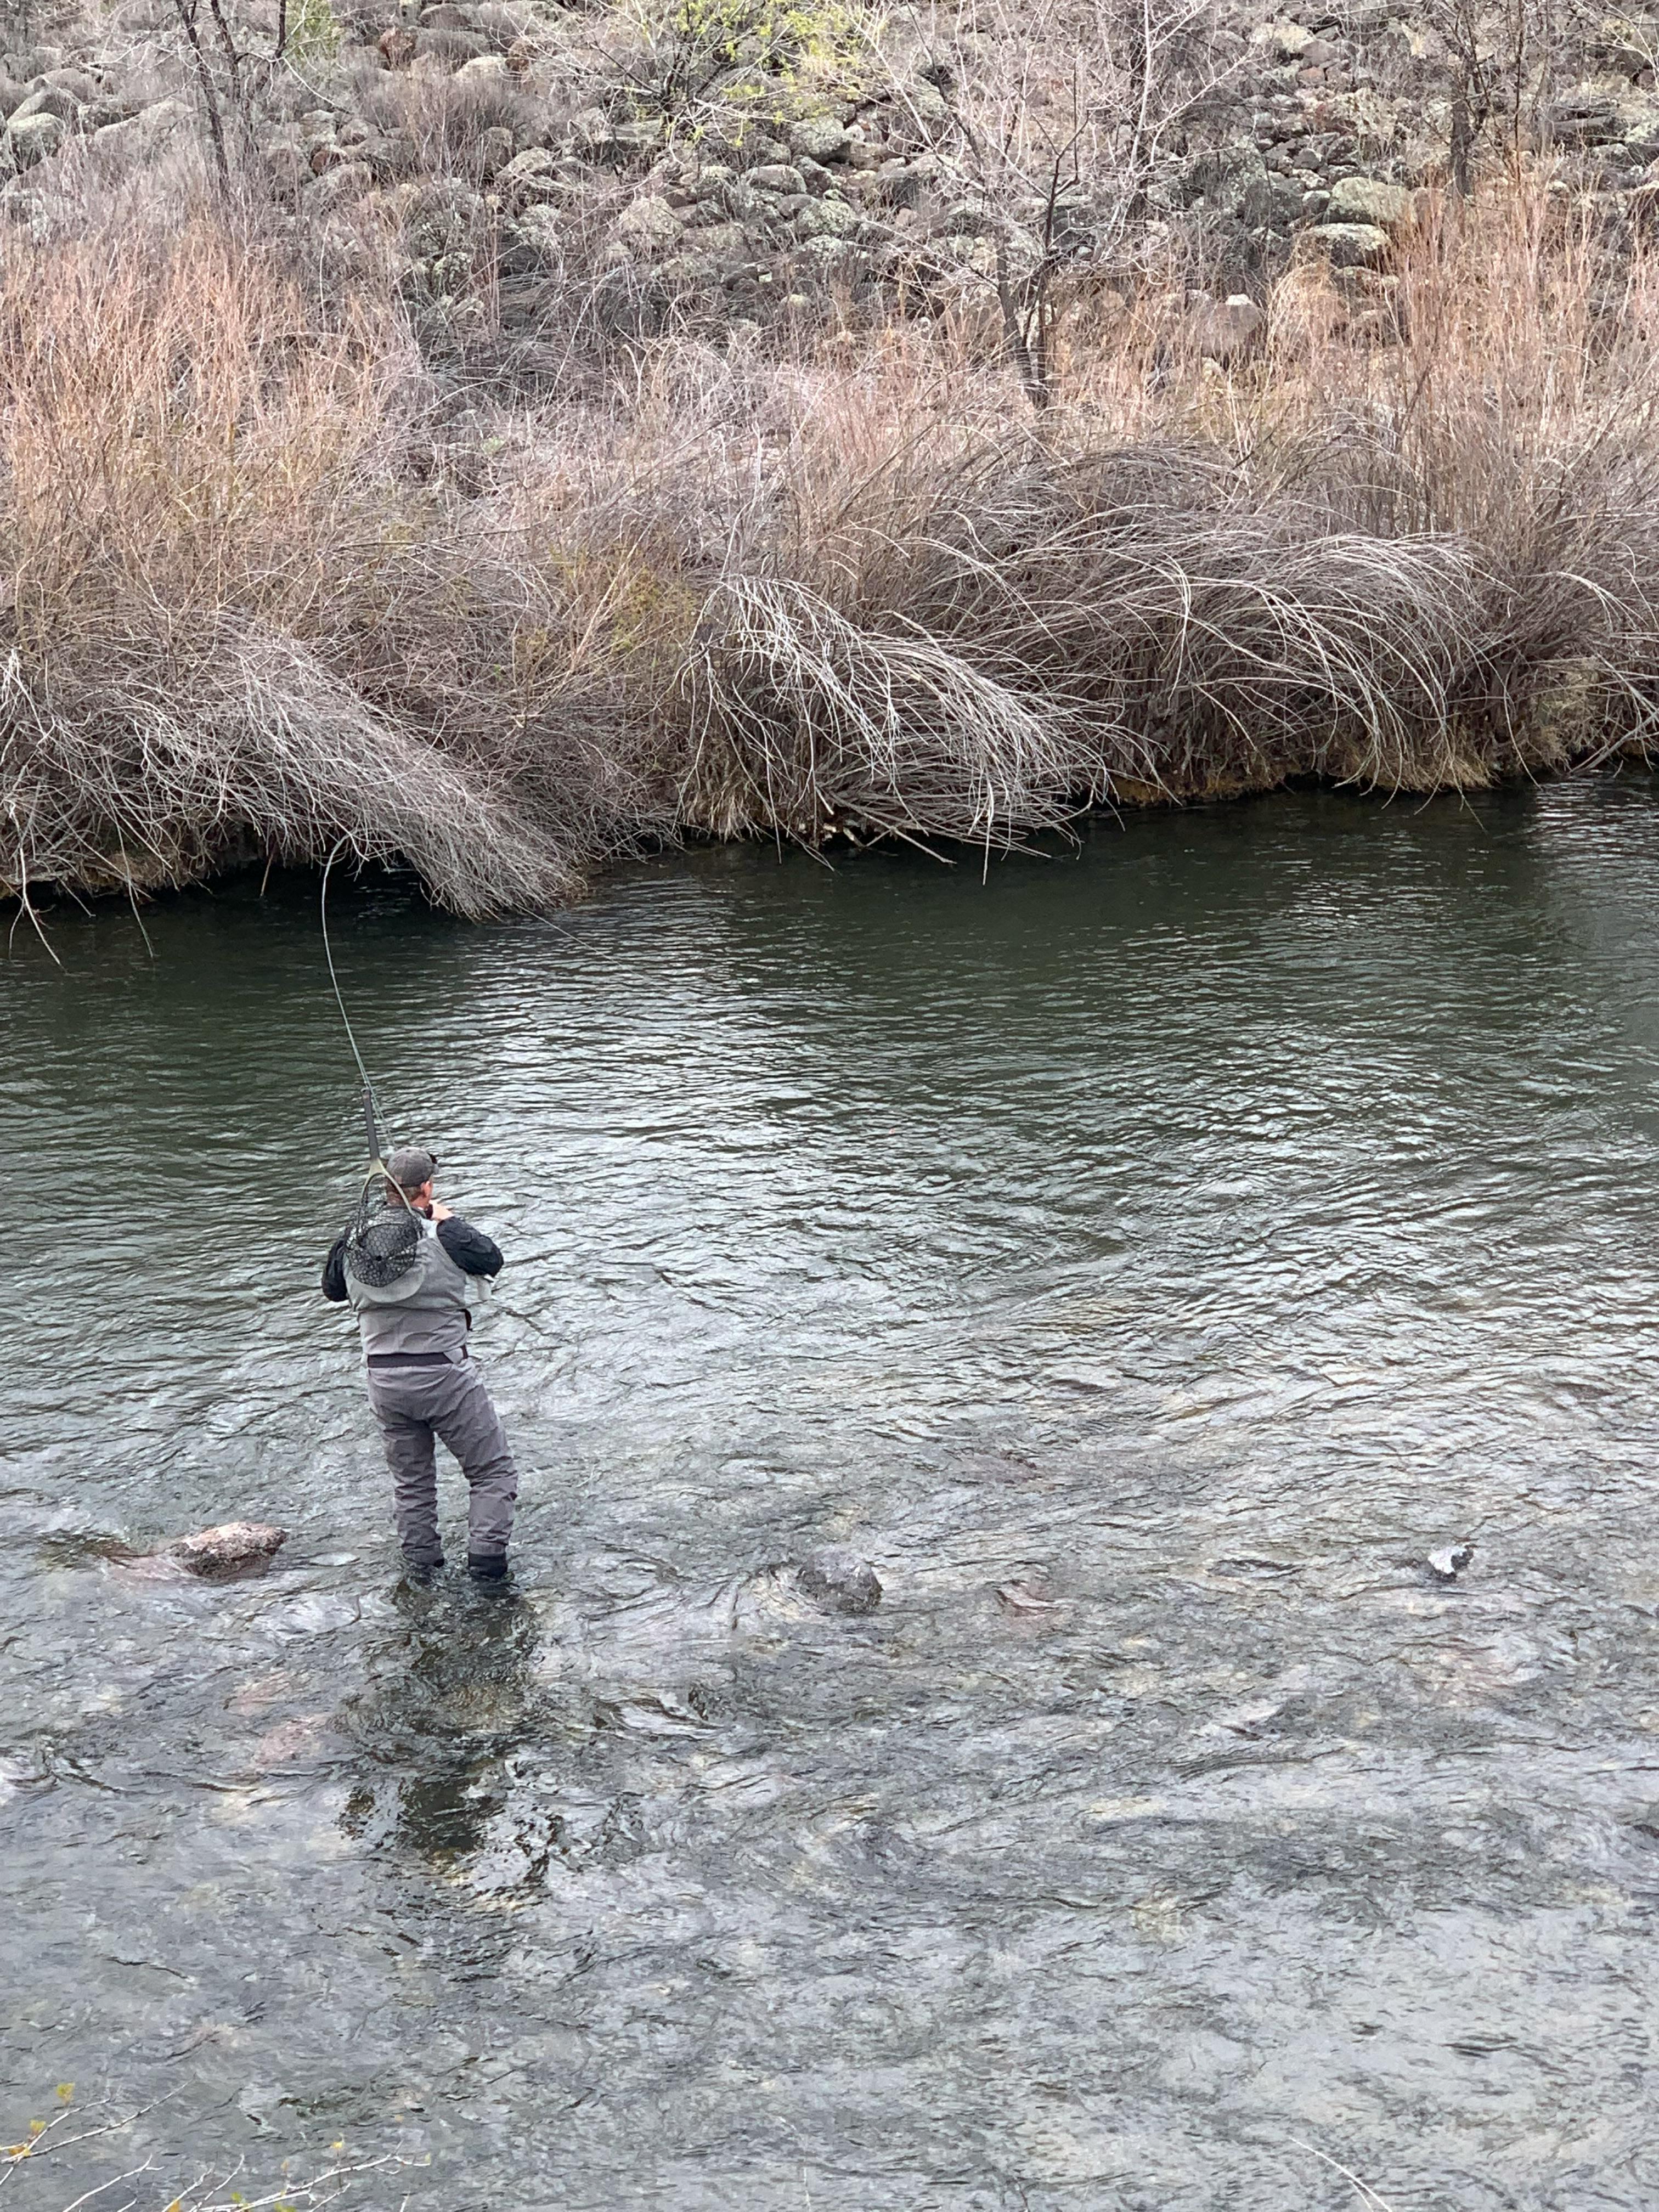 A man is fishing in a river. He is wearing waders.